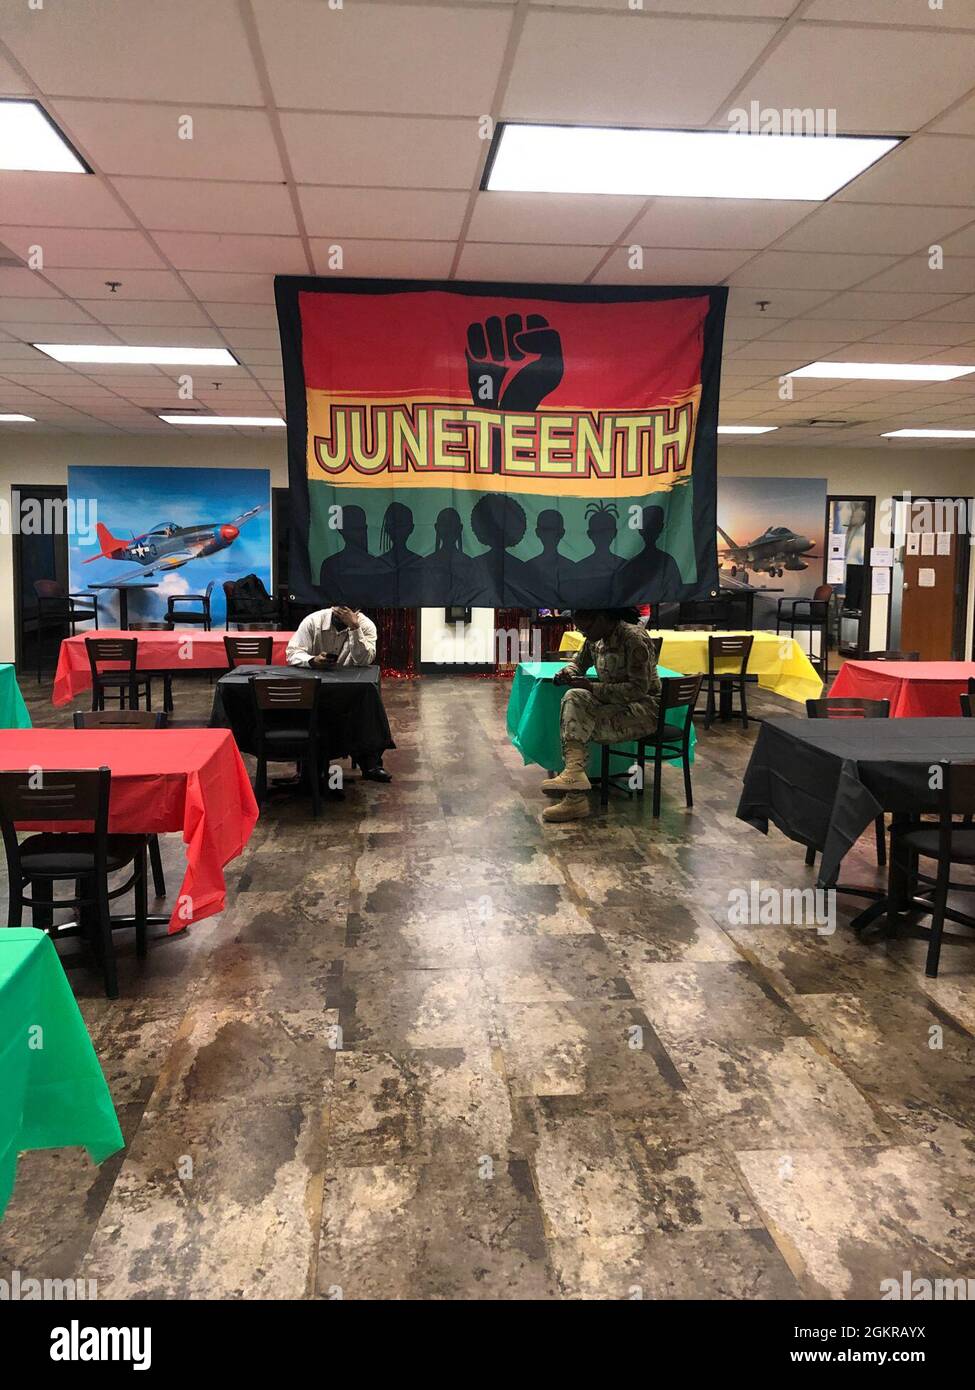 A banner hangs decorating the space where the Taste of Soul Juneteenth Celebration was held at Sheppard Air Force Base, Texas, June 18, 2021. Juneteenth was recognized as a federal holiday on June 17, 2021 when president Joe Biden signed the Juneteenth National Independence Day Act into law. Juneteenth celebrates the day when Major General Gordon Granger enacted General Order No. 3, informing people in Texas that slaves were emancipated. Stock Photo